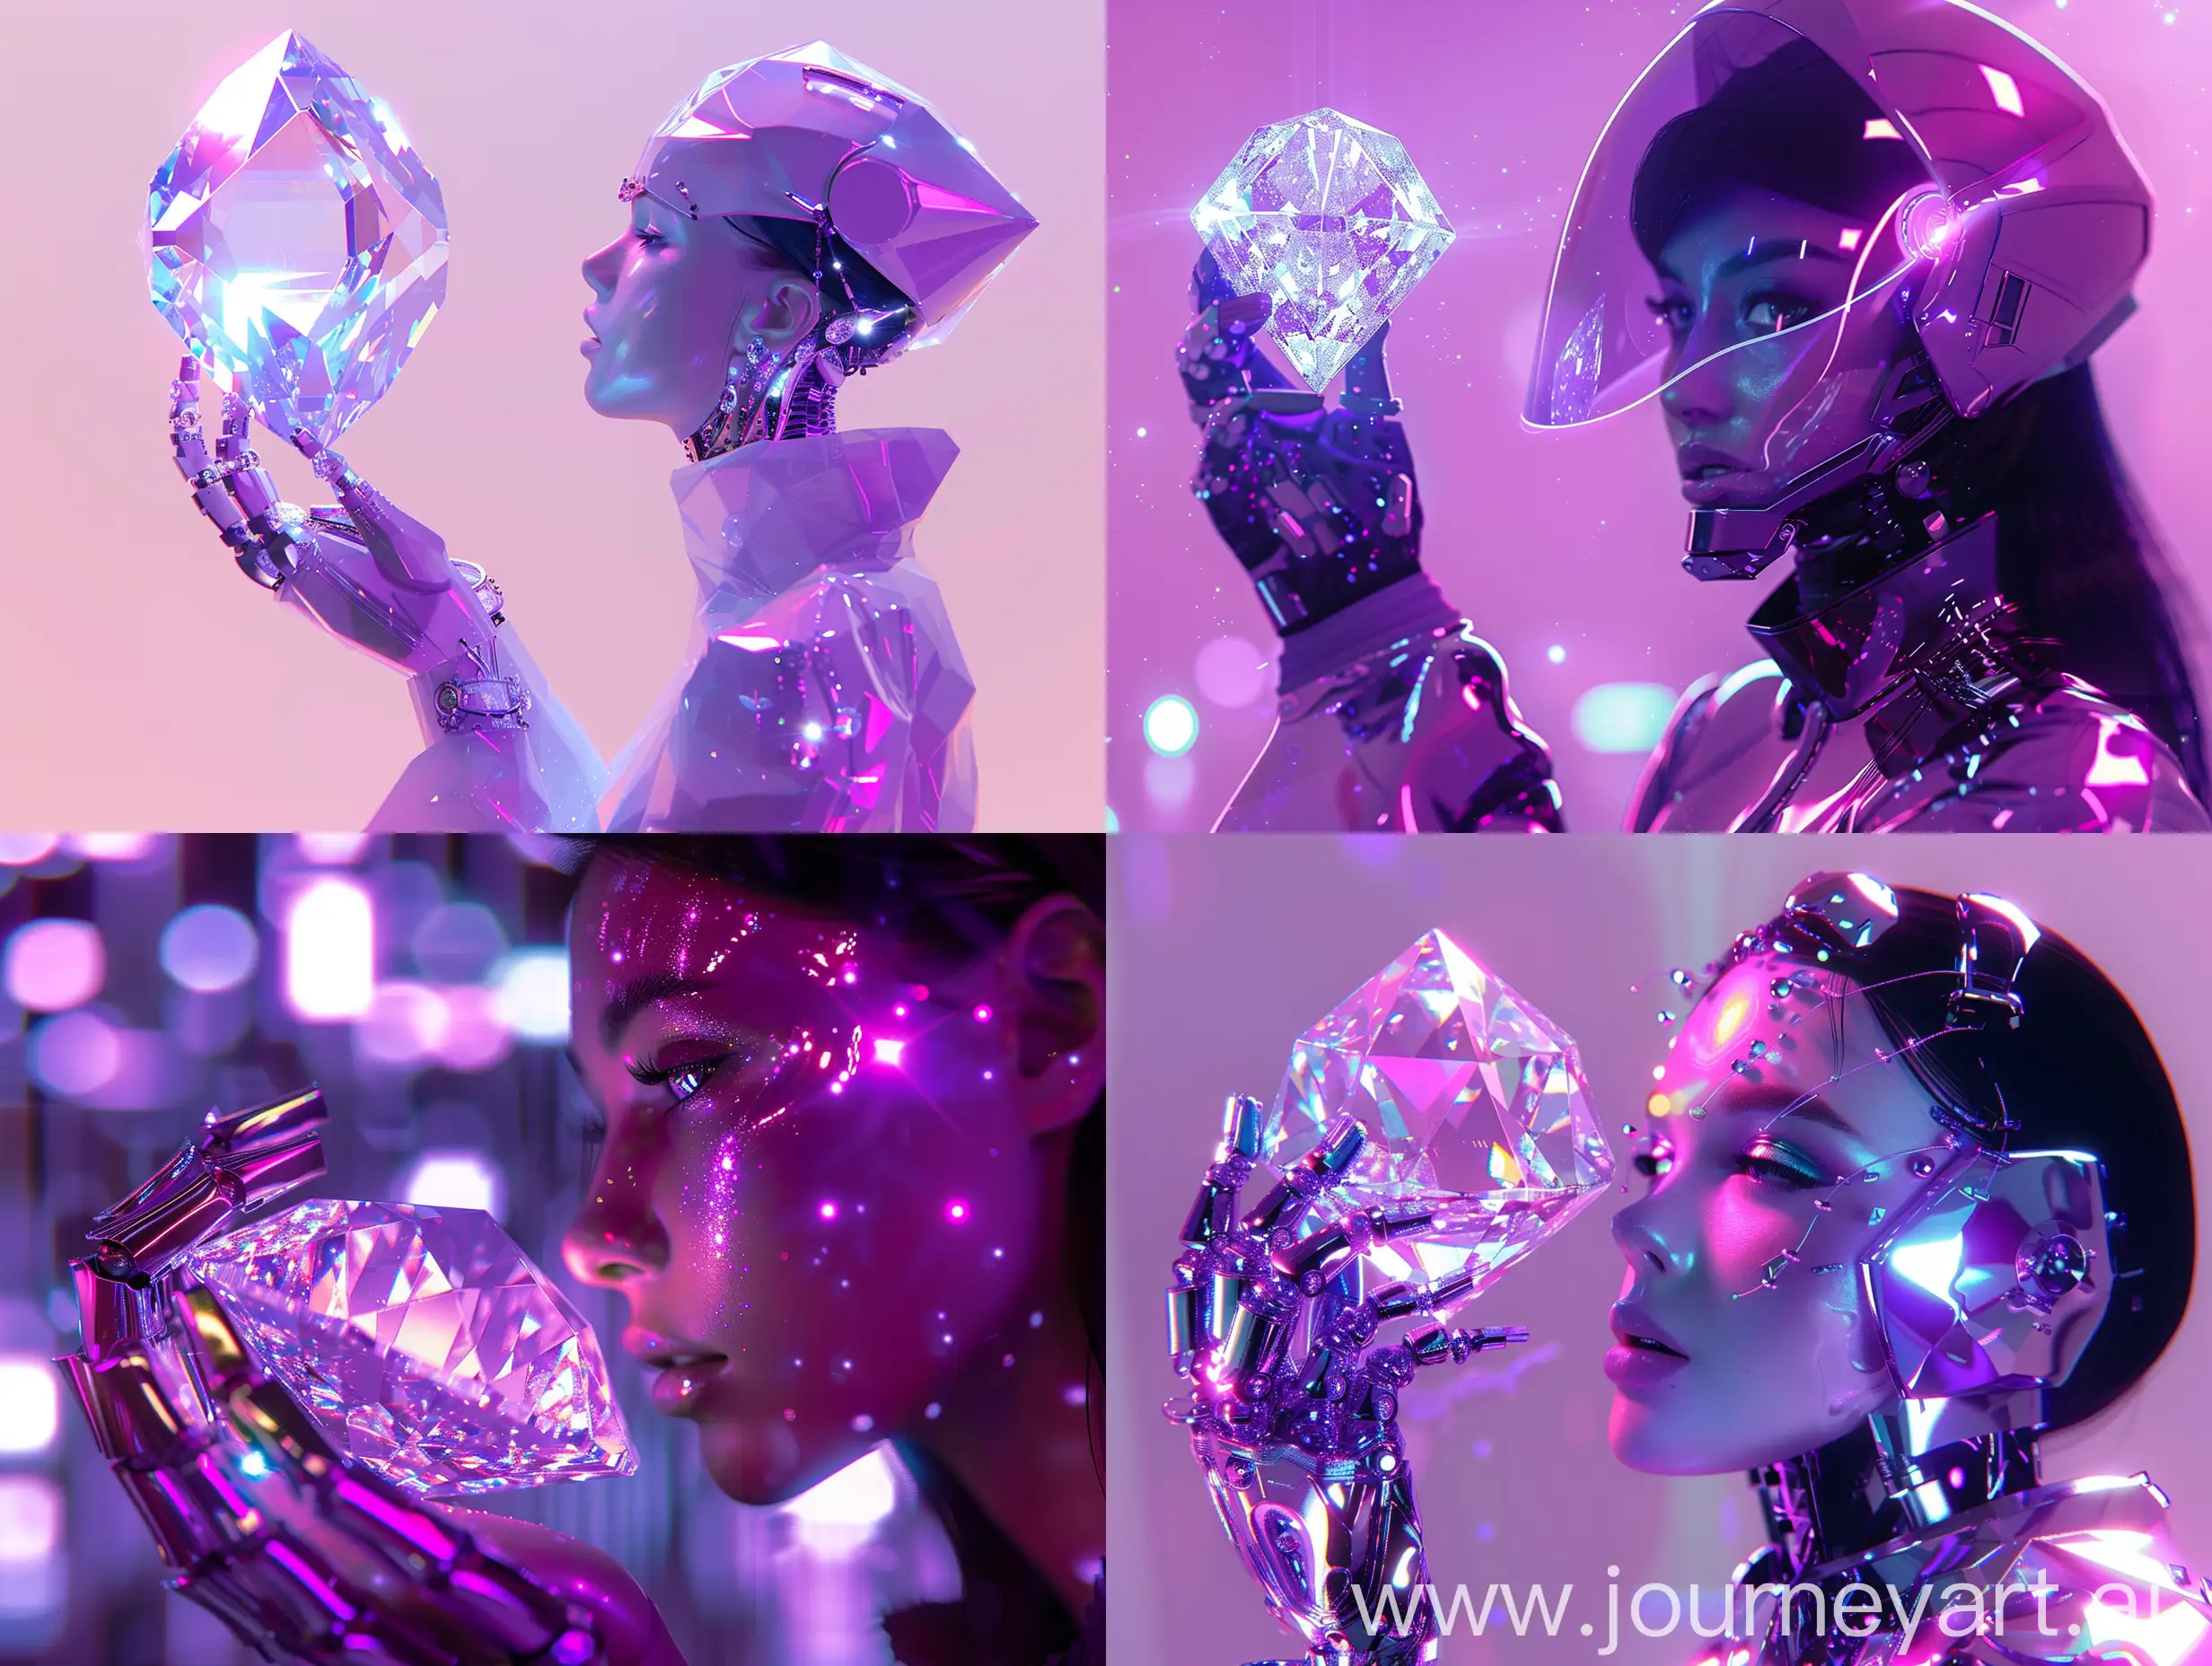 a cyborg woman holding a diamond, refracted sparkles, crystal refraction of light, warps, profile picture, wallpaper, swarovski, synthwave, purple theme, Dream wave, pastel, futuristic, lushwave,
